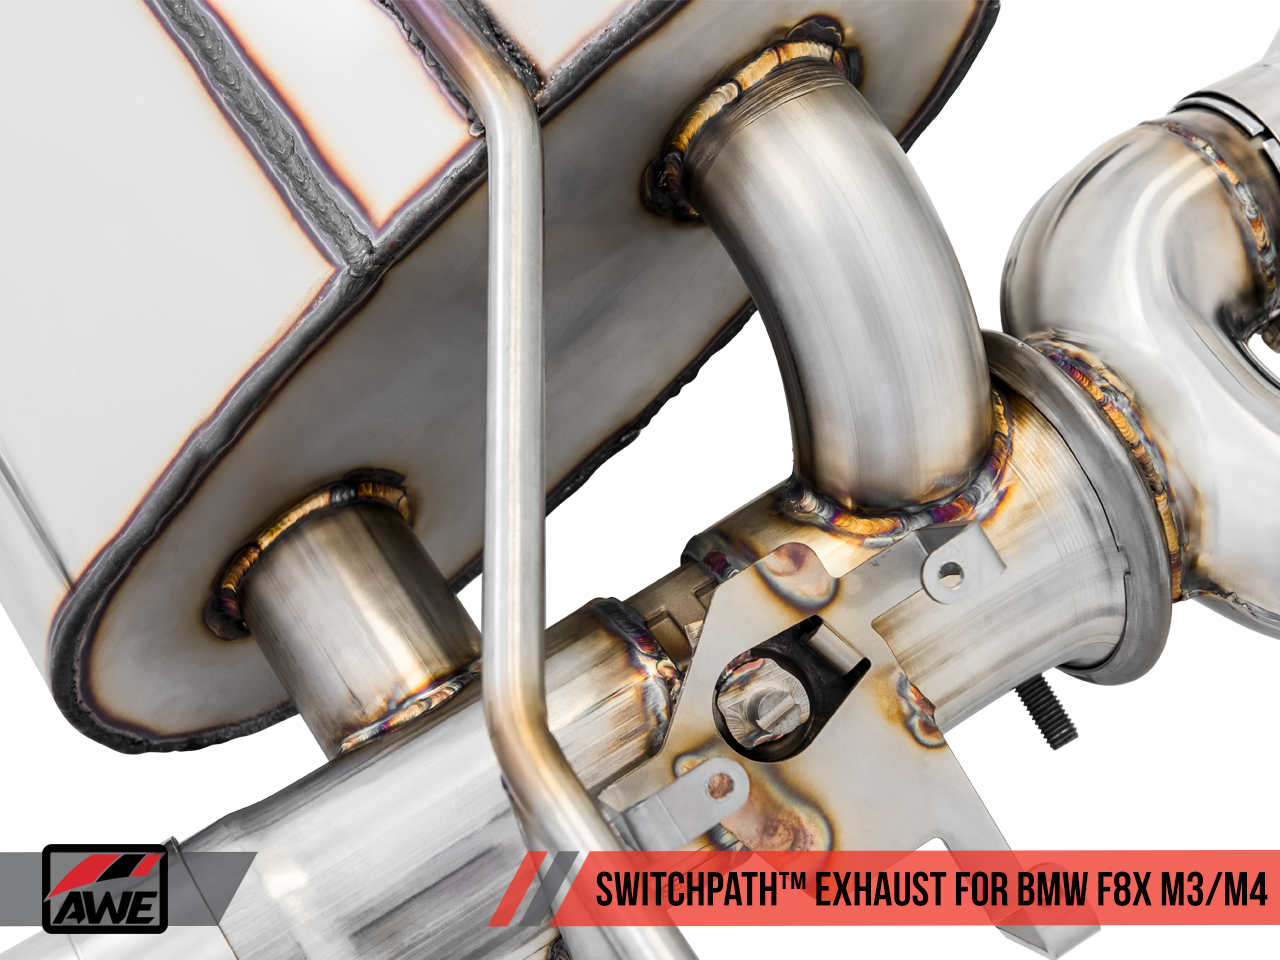 AWE Non Resonated SwitchPath™ Exhaust for BMW F8X M3 / M4 -- Diamond Black Tips (90mm)